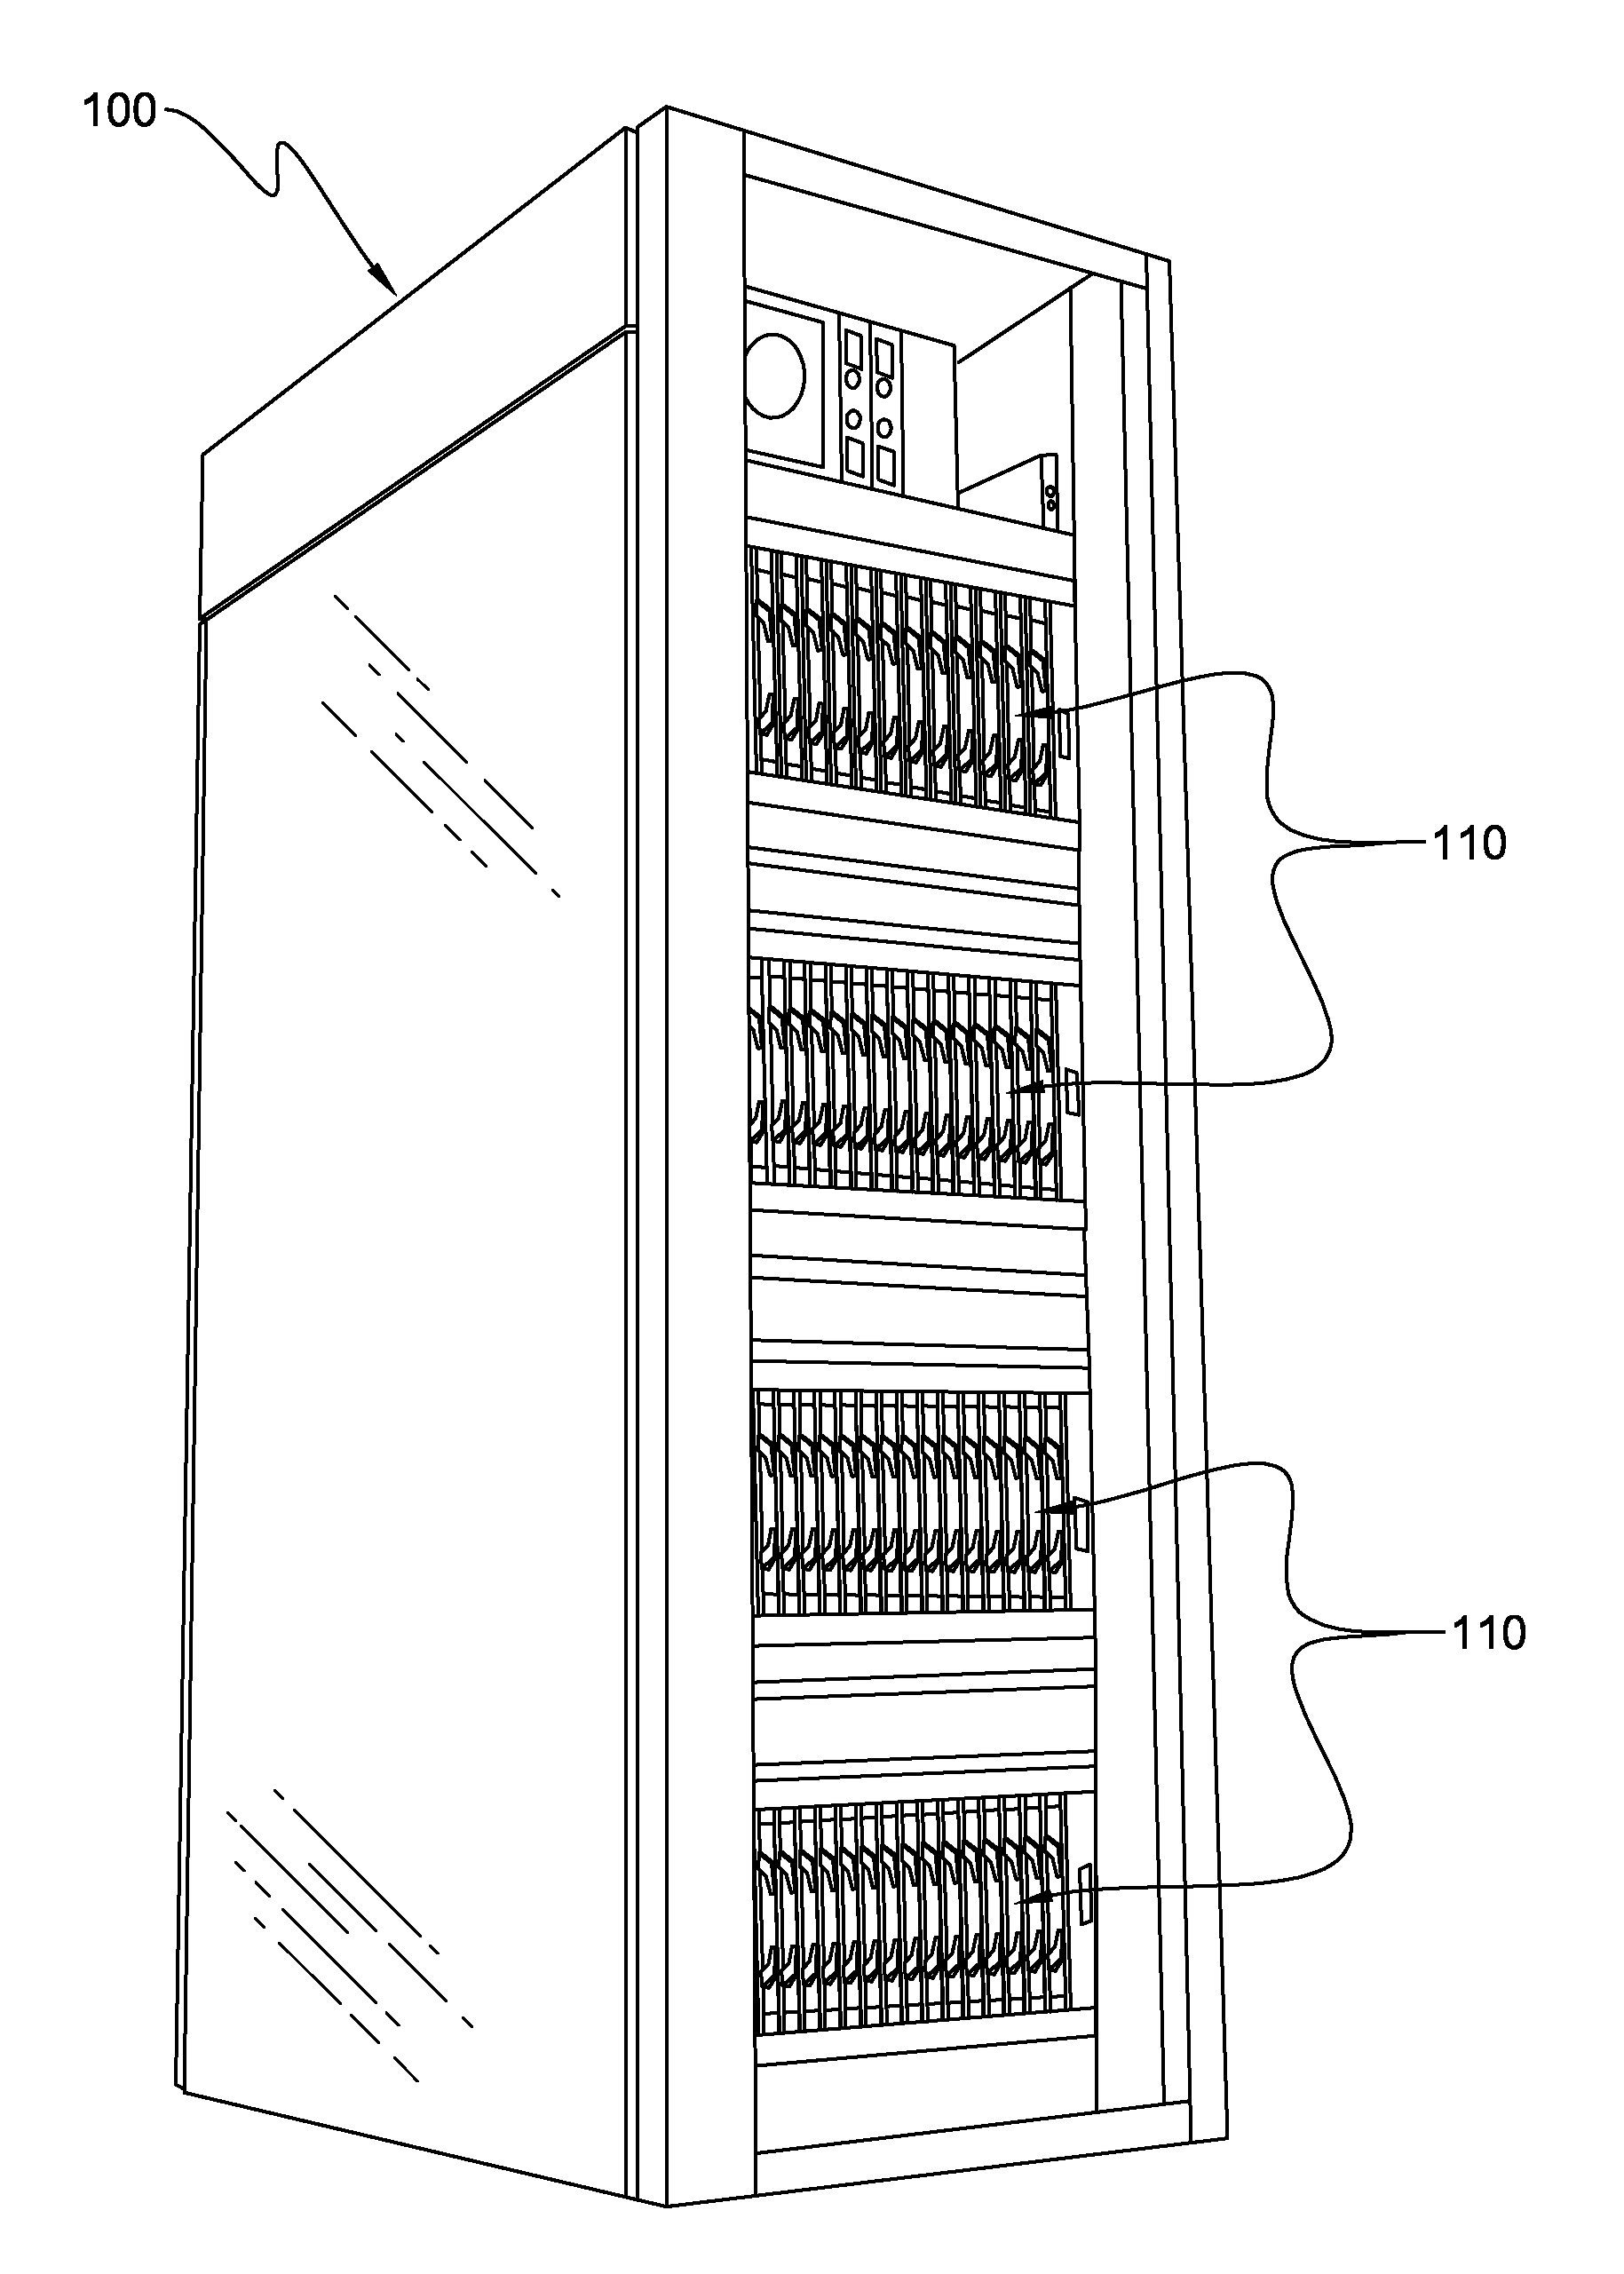 Apparatus and method for facilitating immersion-cooling of an electronic subsystem